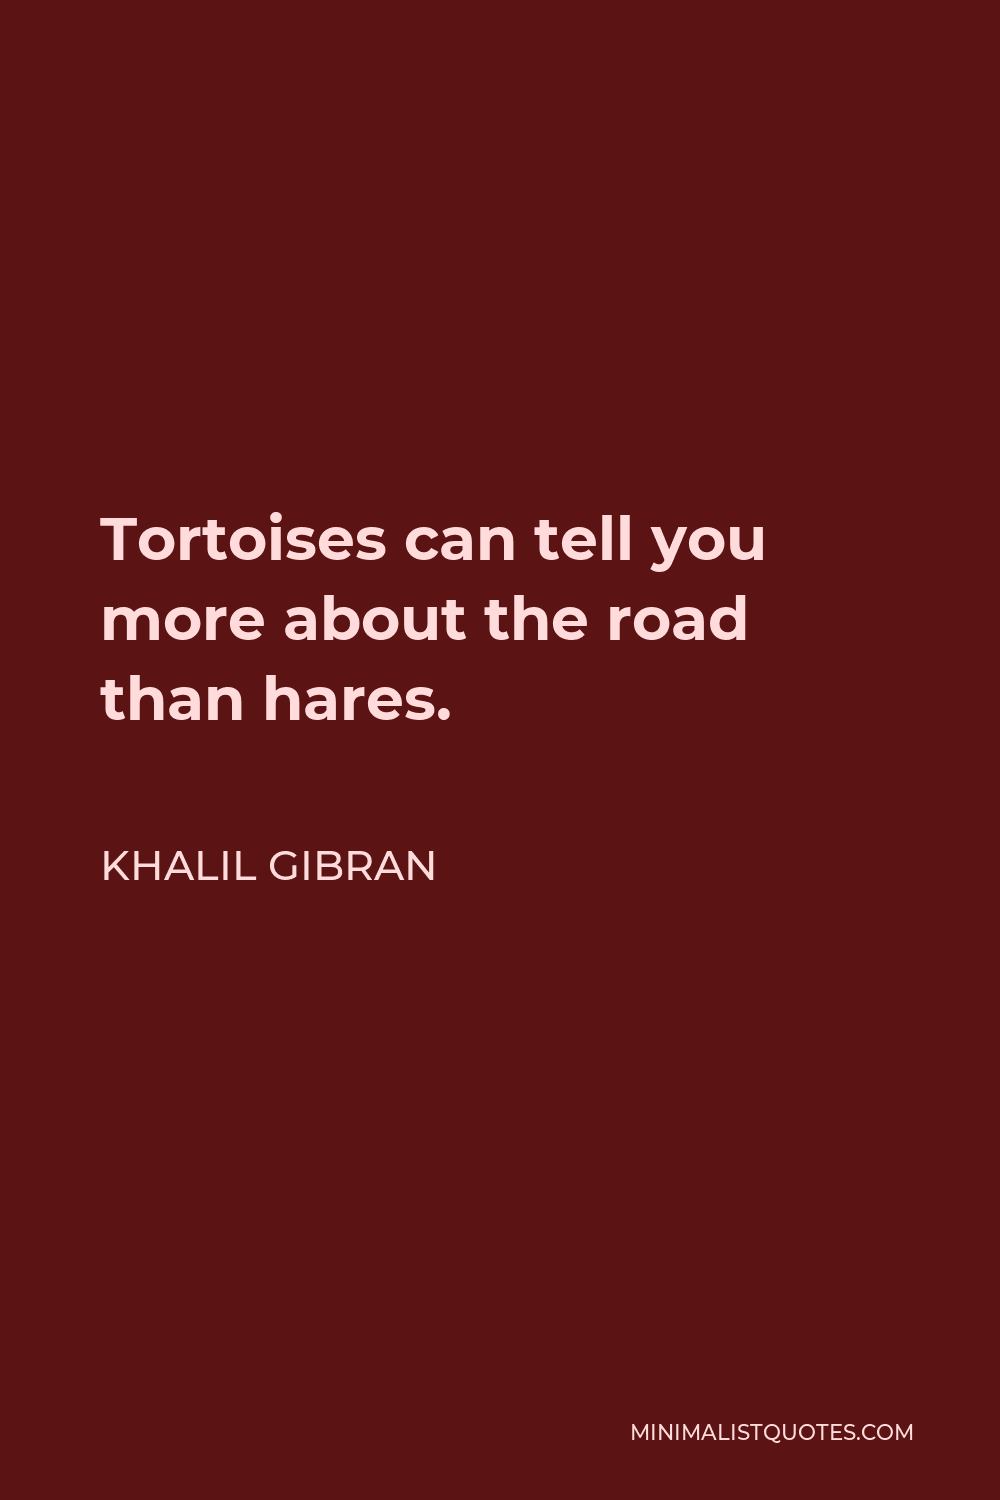 Khalil Gibran Quote - Tortoises can tell you more about the road than hares.